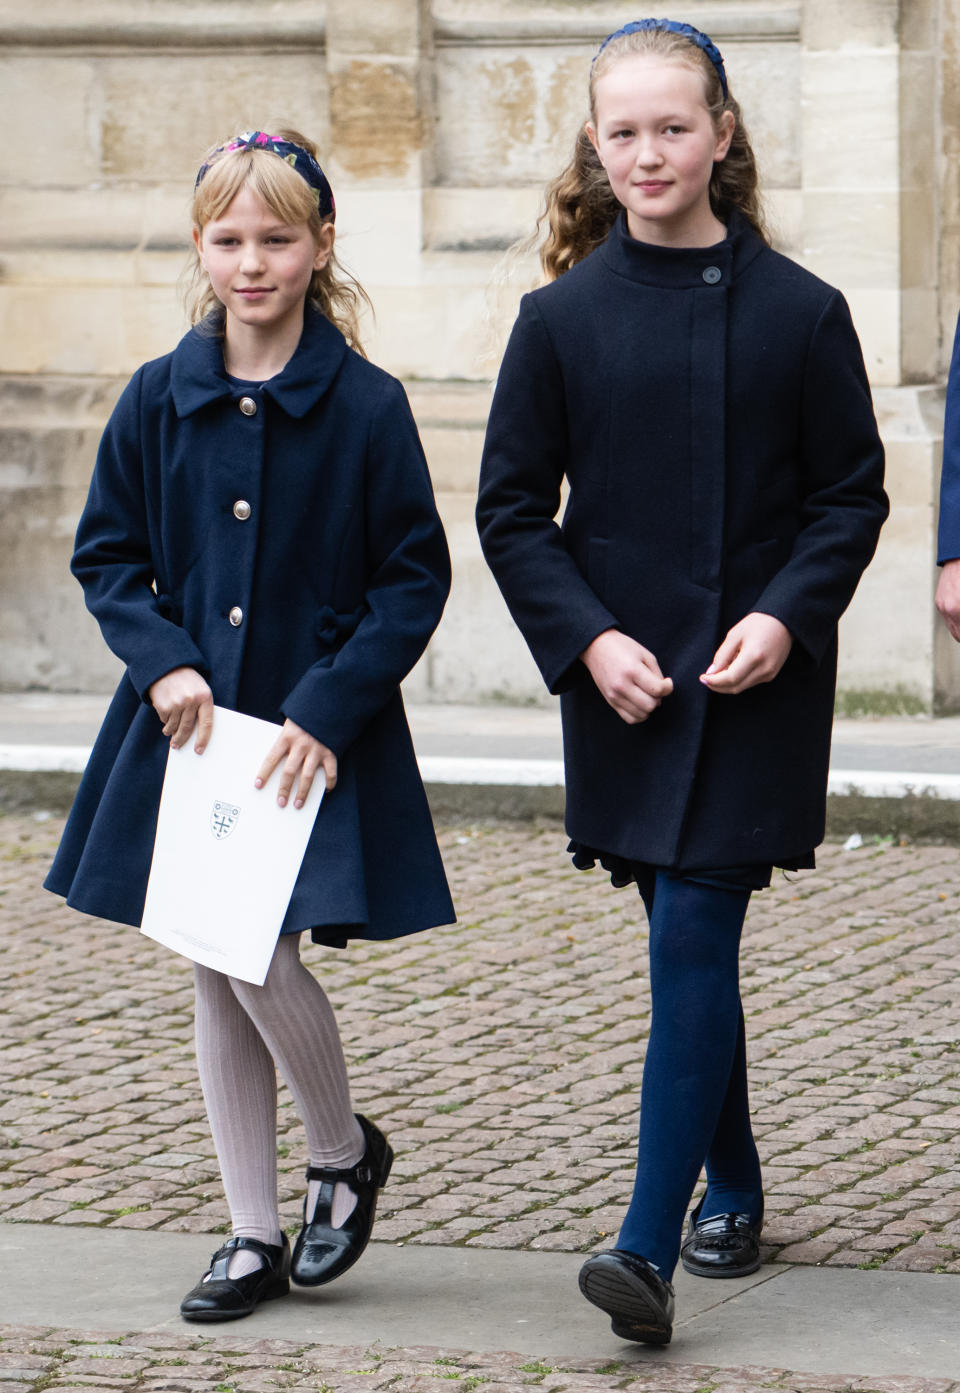 LONDON, ENGLAND - MARCH 29:  Savannah Philips and Isla Phillips at the Memorial service for The Duke Of Edinburgh Westminster Abbey on March 29, 2022 in London, England. (Photo by Samir Hussein/WireImage)